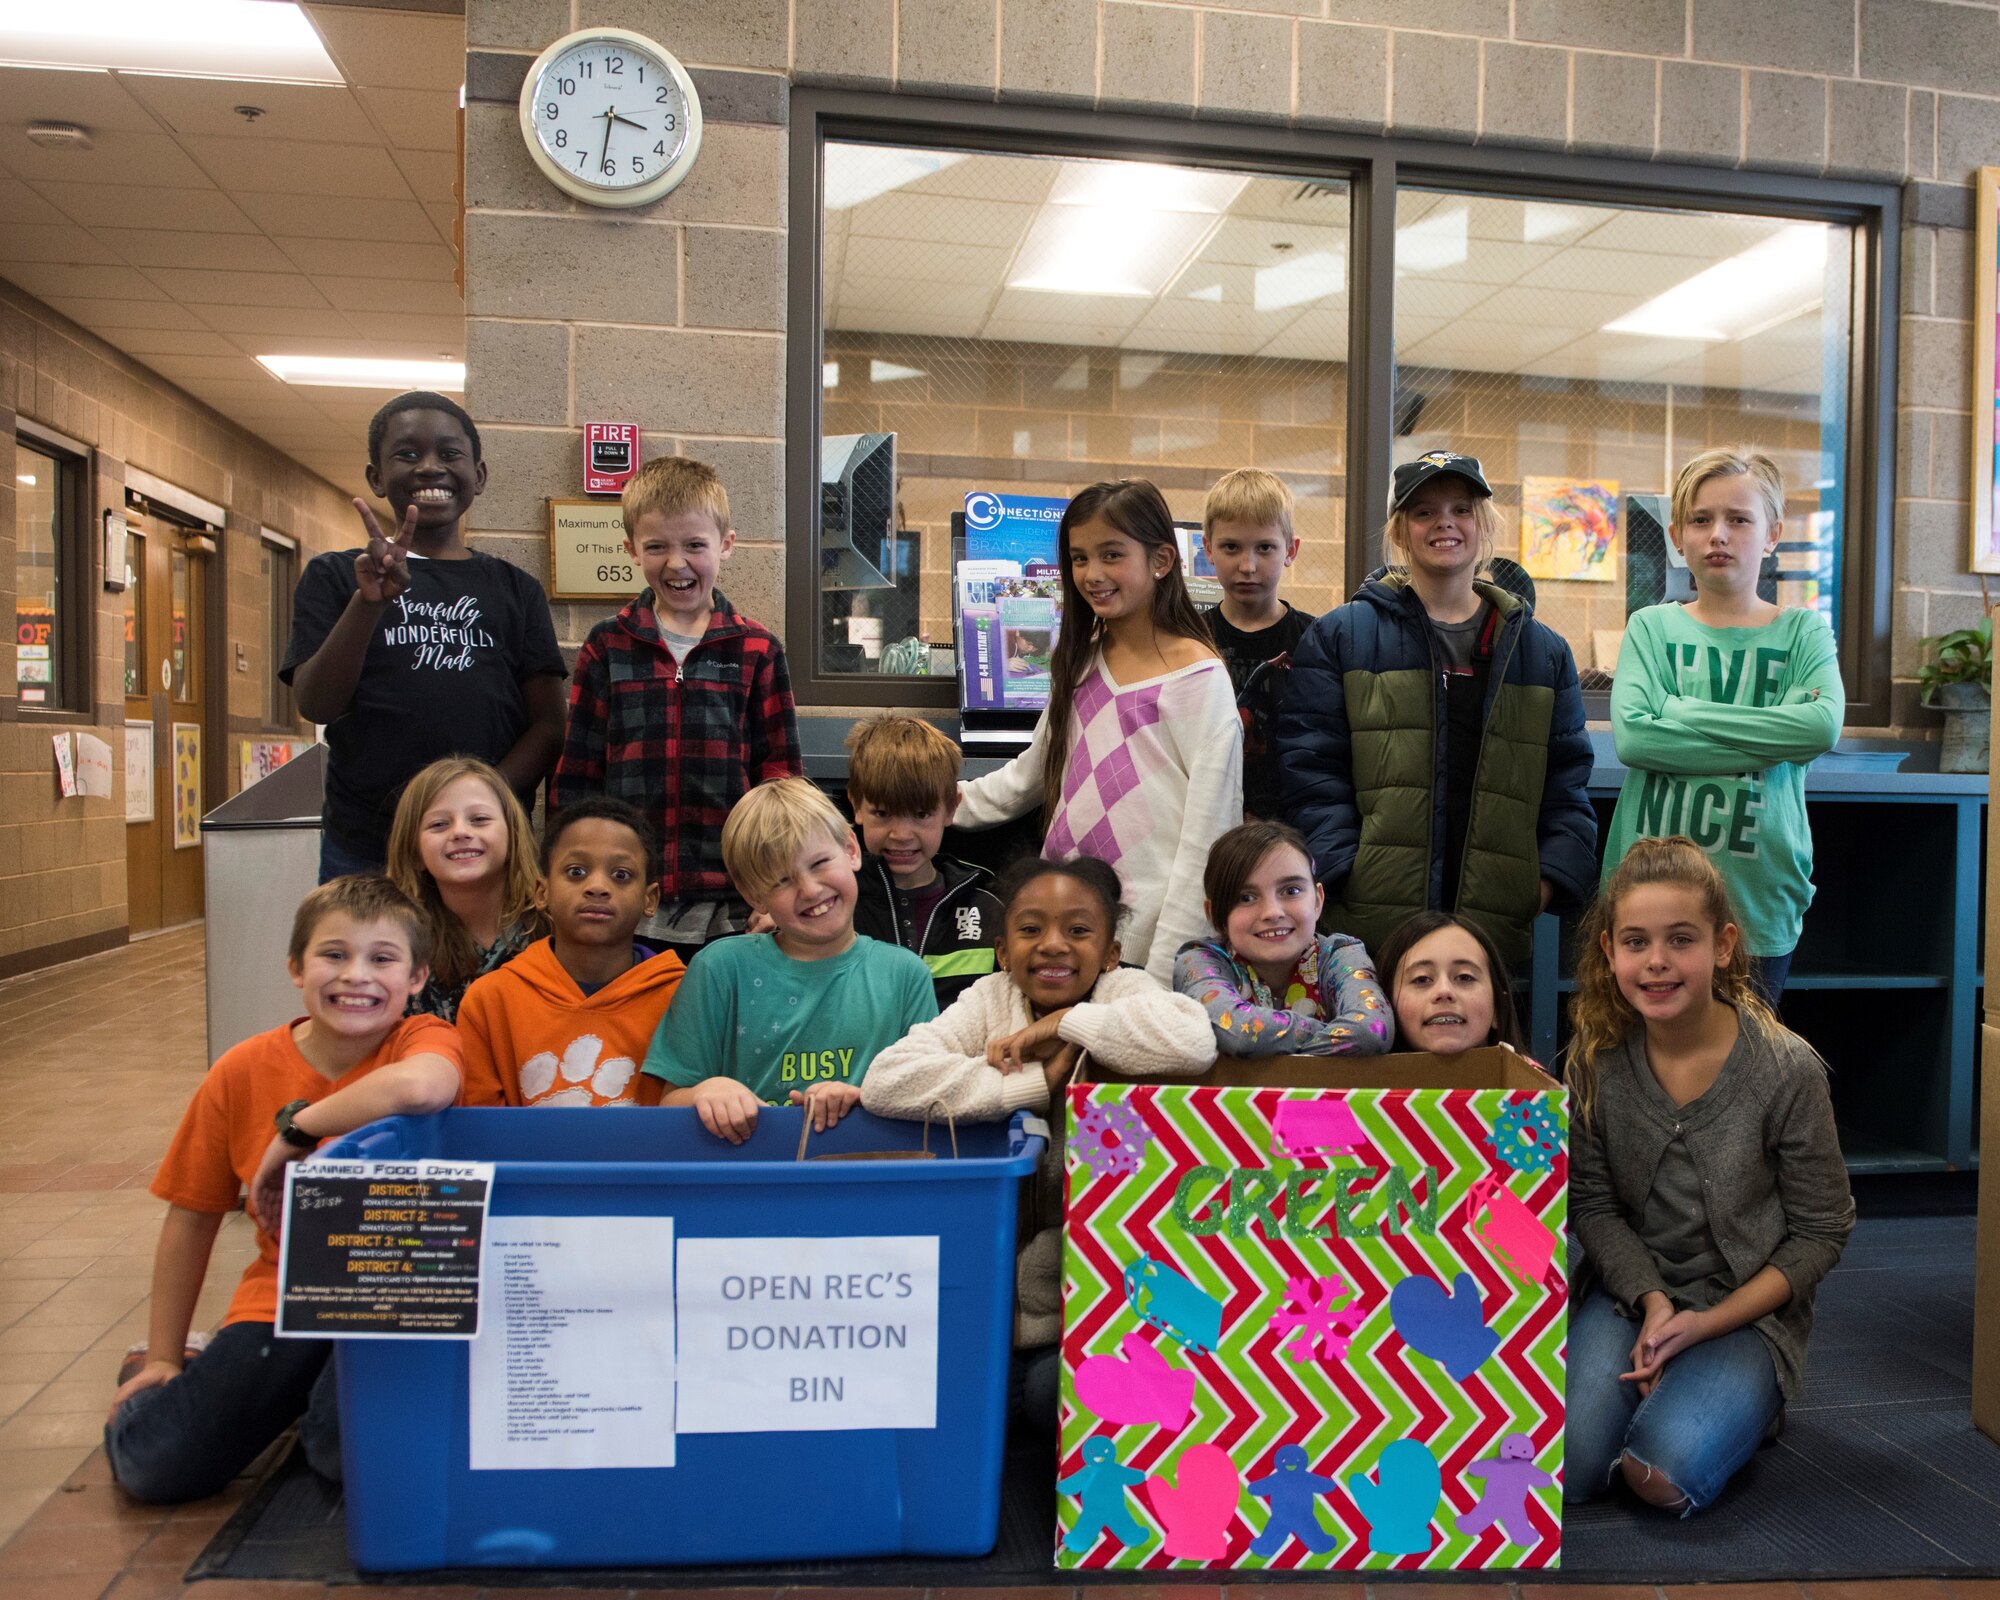 Image of Youth Center children posing for a photo behind food drive donation bins, Dec. 13, 2018, at Mountain Home Air Force Base, Idaho. The Youth Center is holding a food drive to give canned and non-perishable food items to families in need. (U.S. Air Force photo by Senior Airman Alaysia Berry)